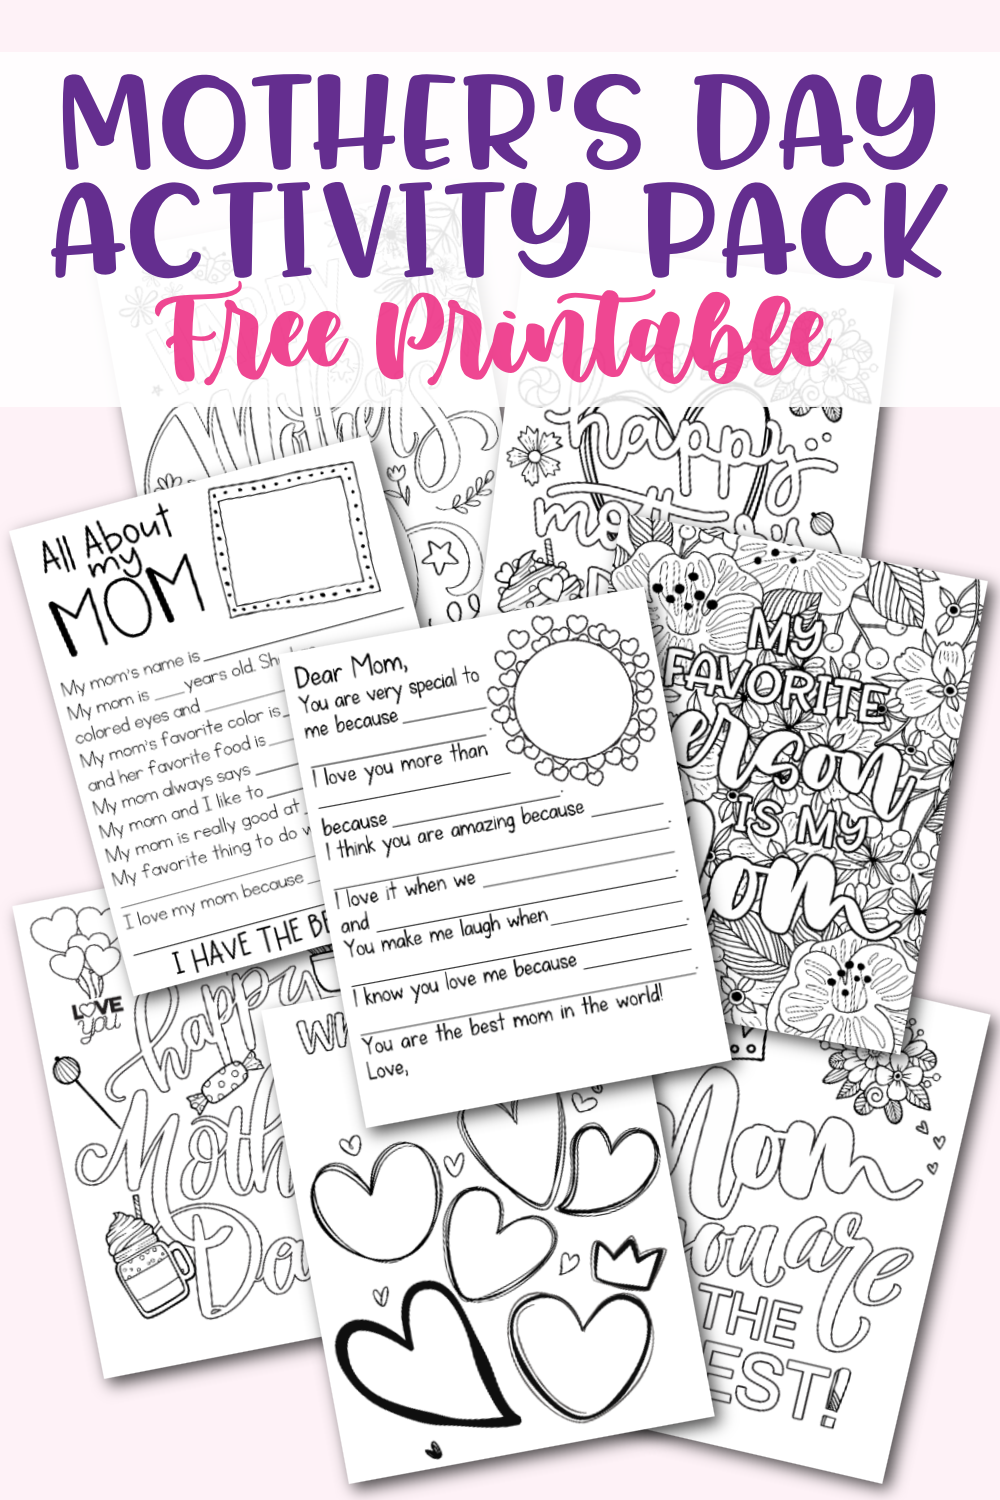 Free Printable Mother's Day Activity Pack